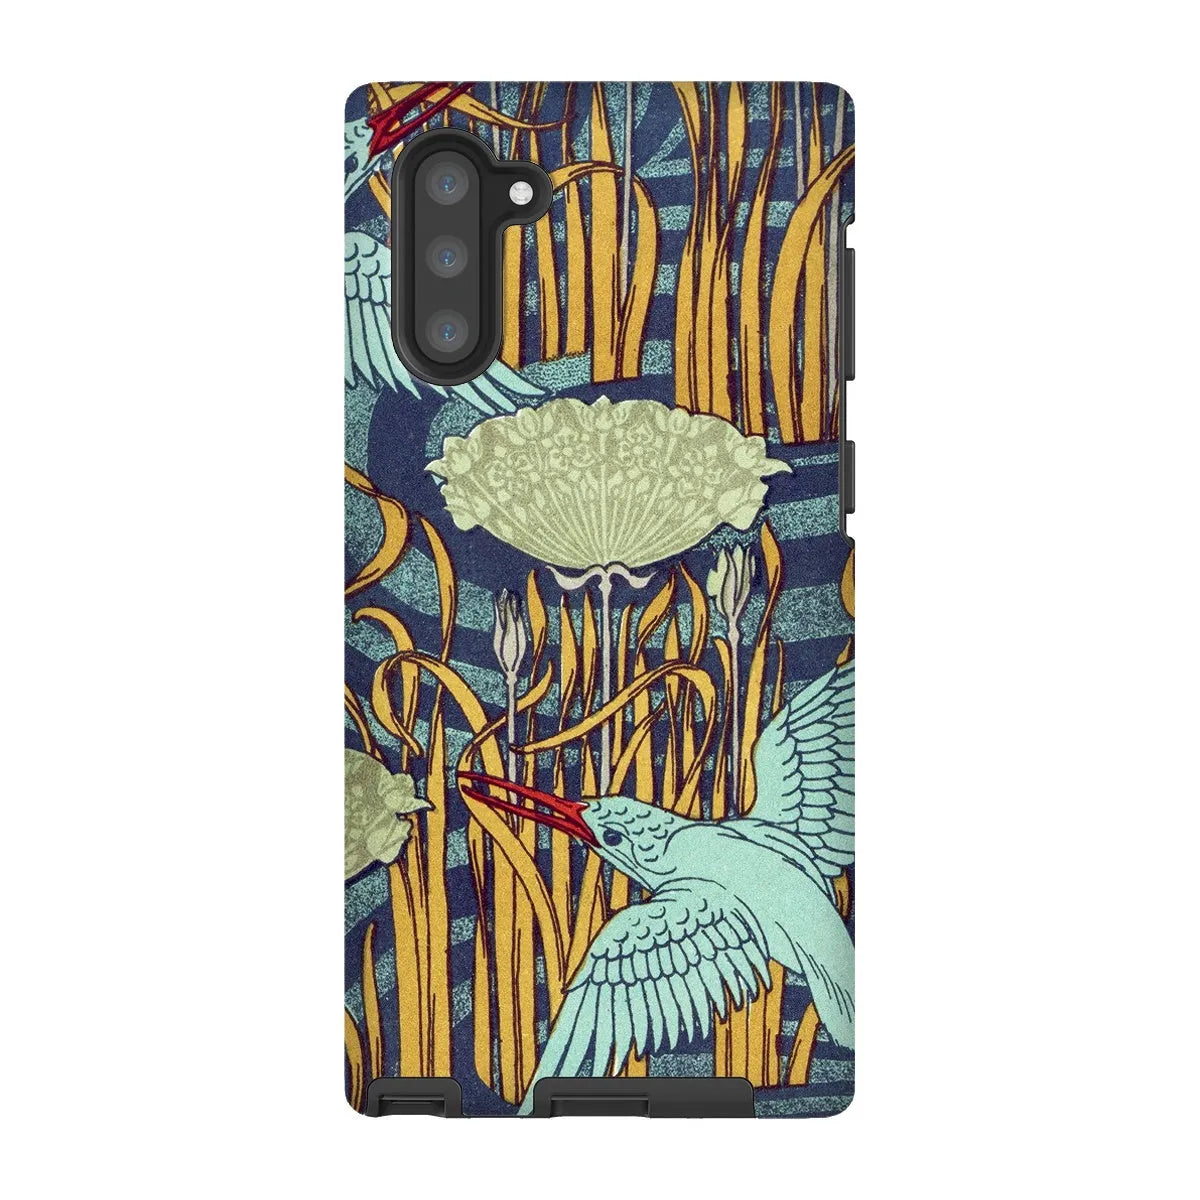 Kingfishers French Art Phone Case - Maurice Pillard Verneuil - Samsung Galaxy Note 10 / Matte - Mobile Phone Cases